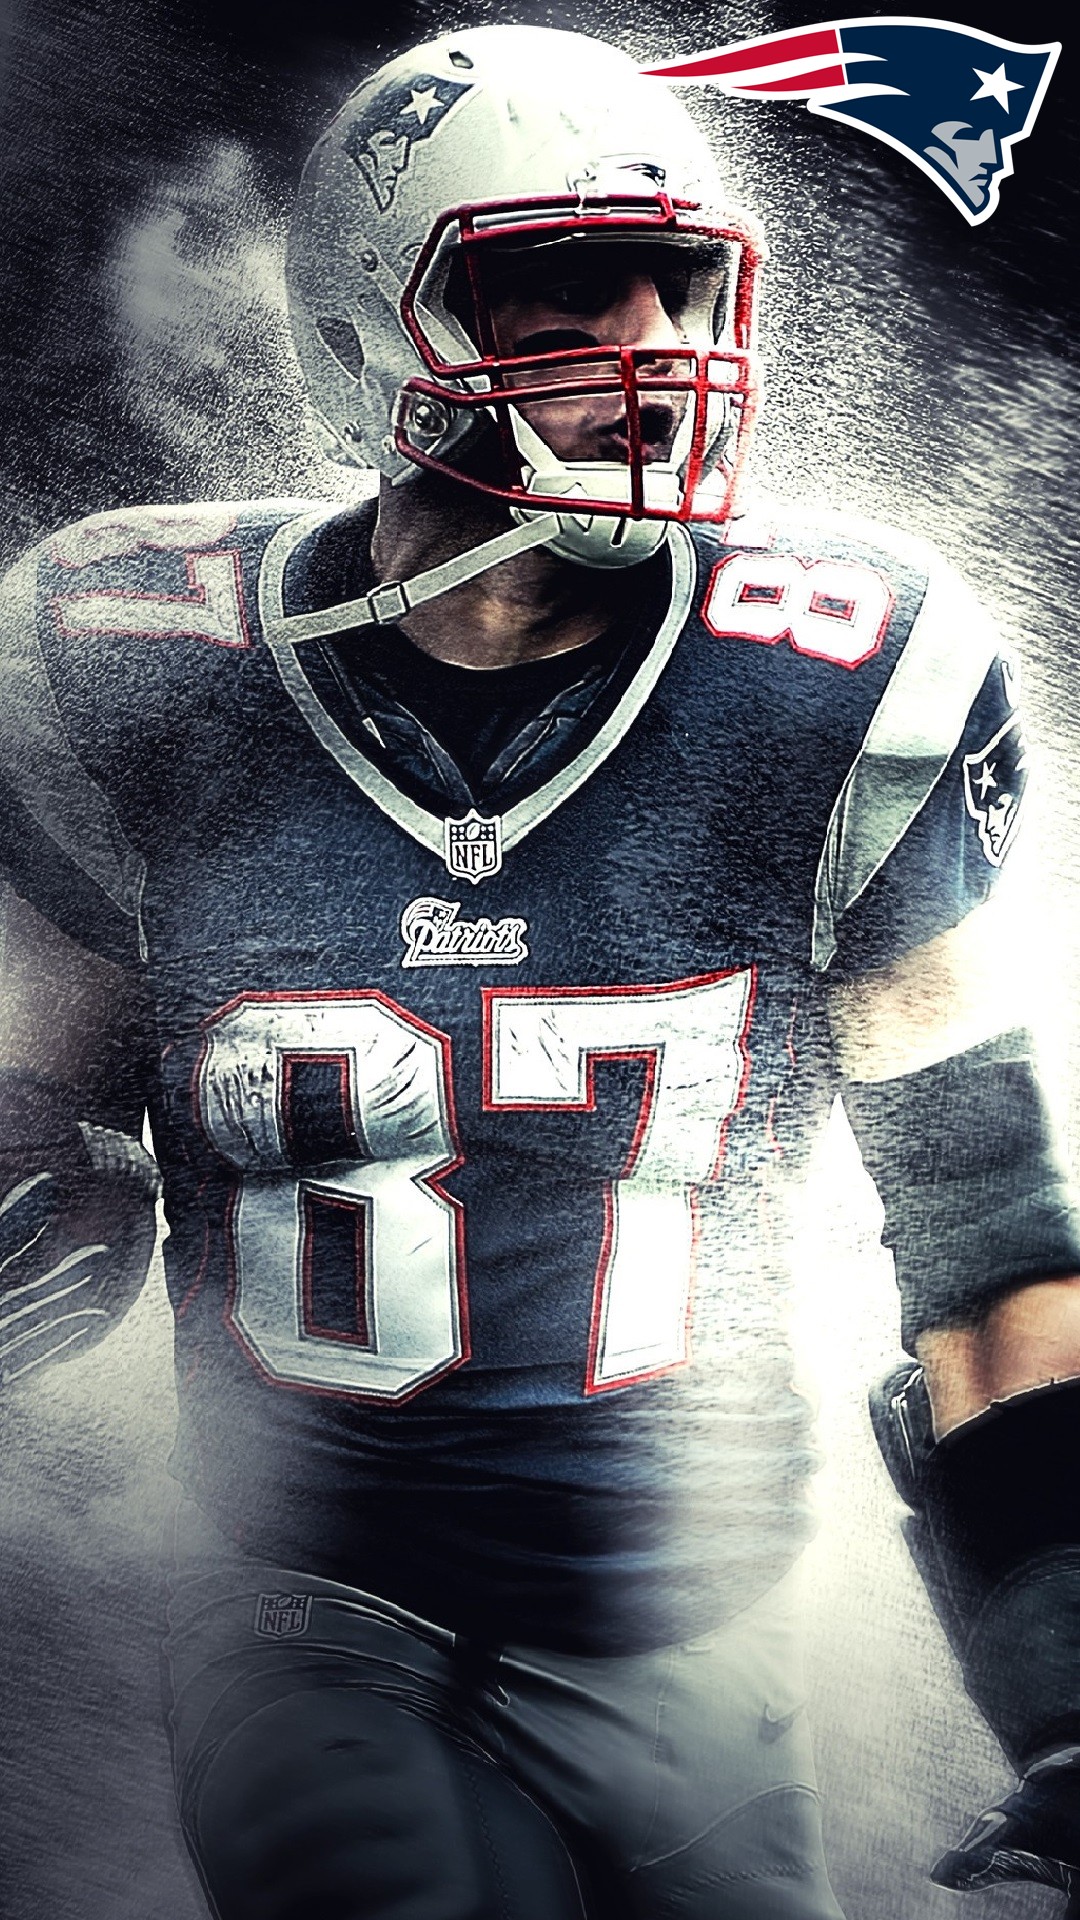 Screensaver iPhone NE Patriots with high-resolution 1080x1920 pixel. Donwload and set as wallpaper for your iPhone X, iPhone XS home screen backgrounds, XS Max, XR, iPhone8 lock screen wallpaper, iPhone 7, 6, SE and other mobile devices